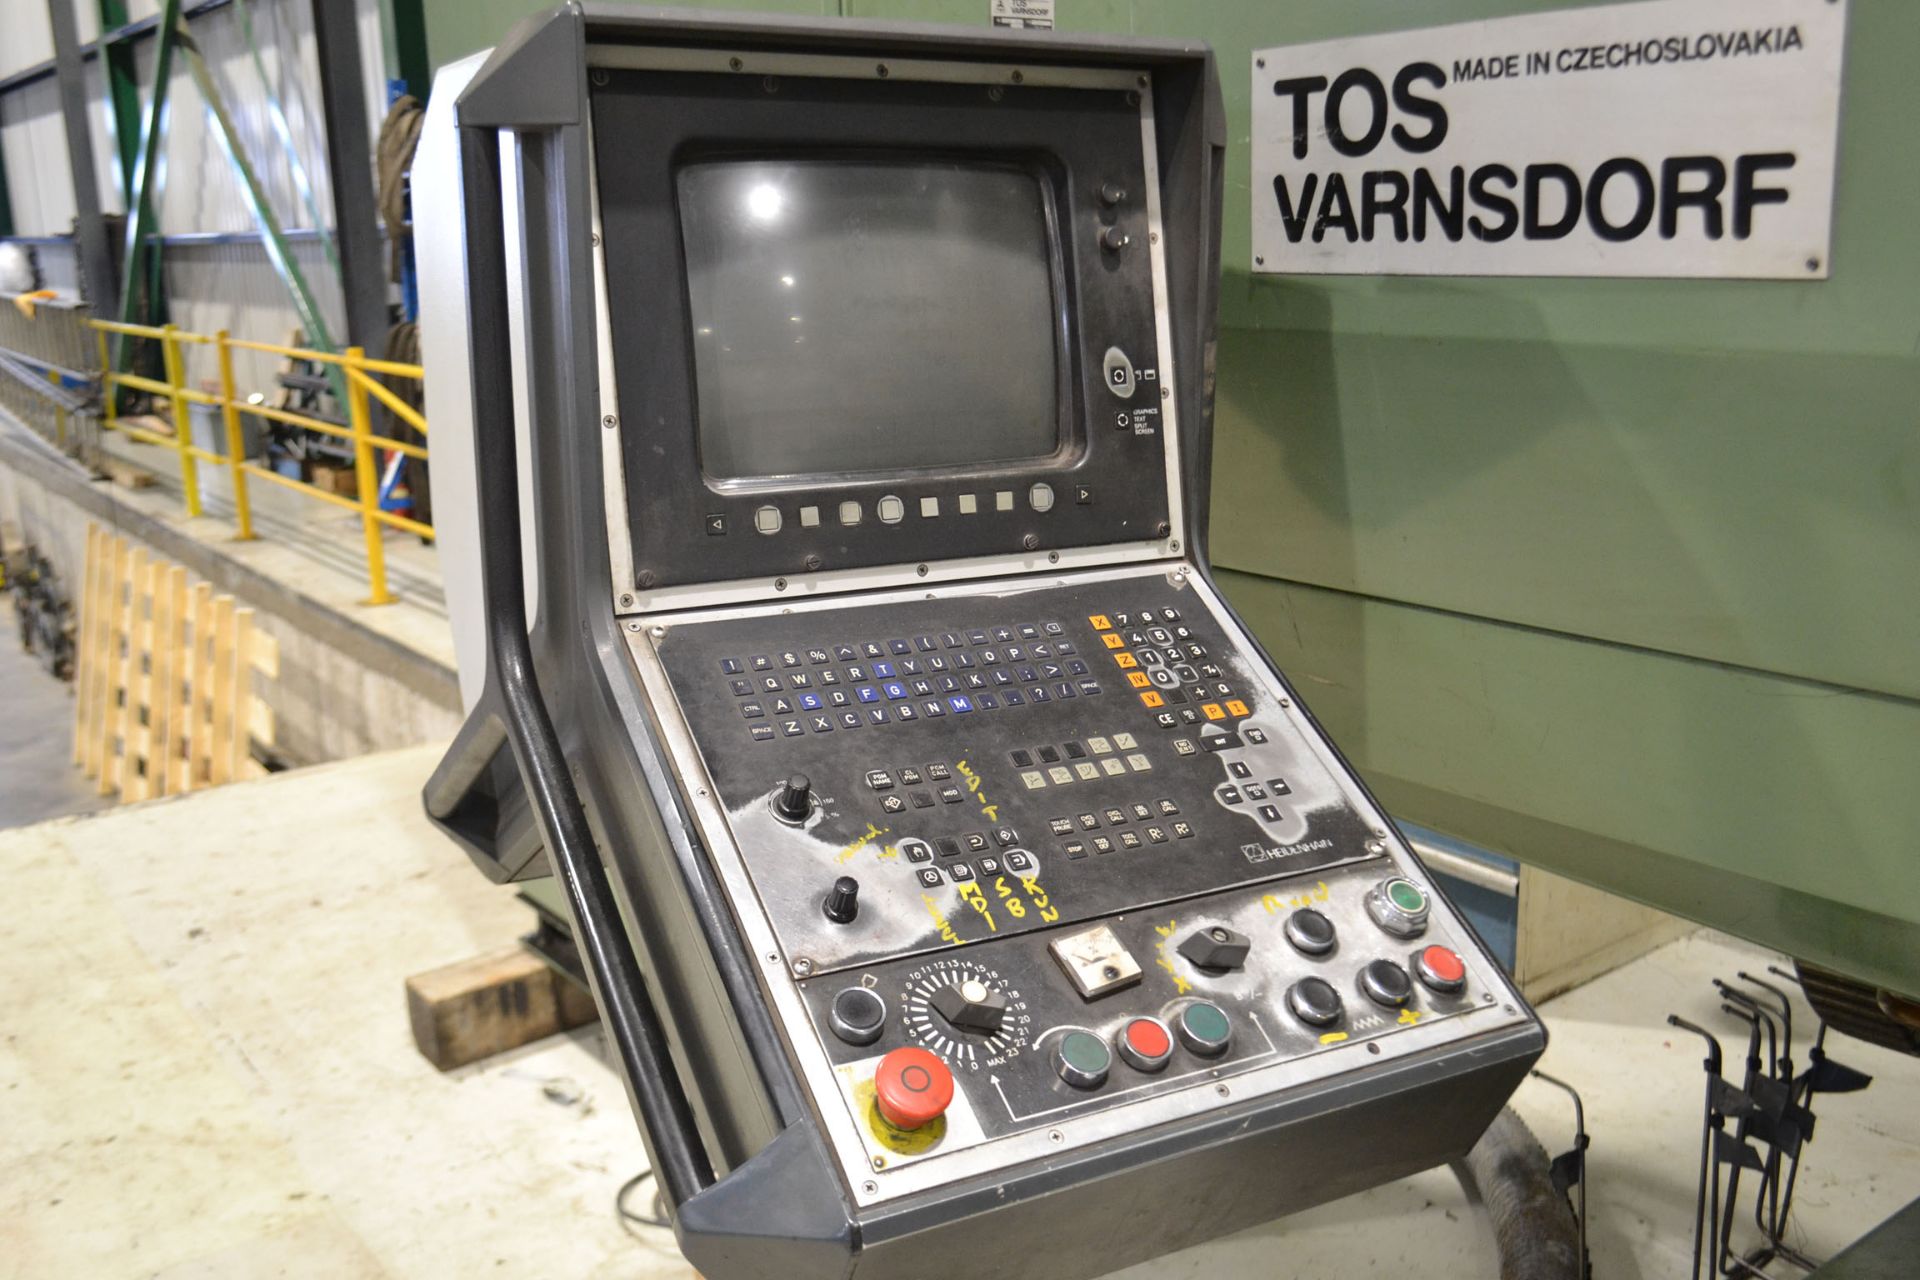 TOS VARNSDORF TABLE TYPE HORIZ. BORING MILL MODEL: WH 10 CNC, WORK SPINDLE DIAMETER: 100 MM (4”) - Image 3 of 4